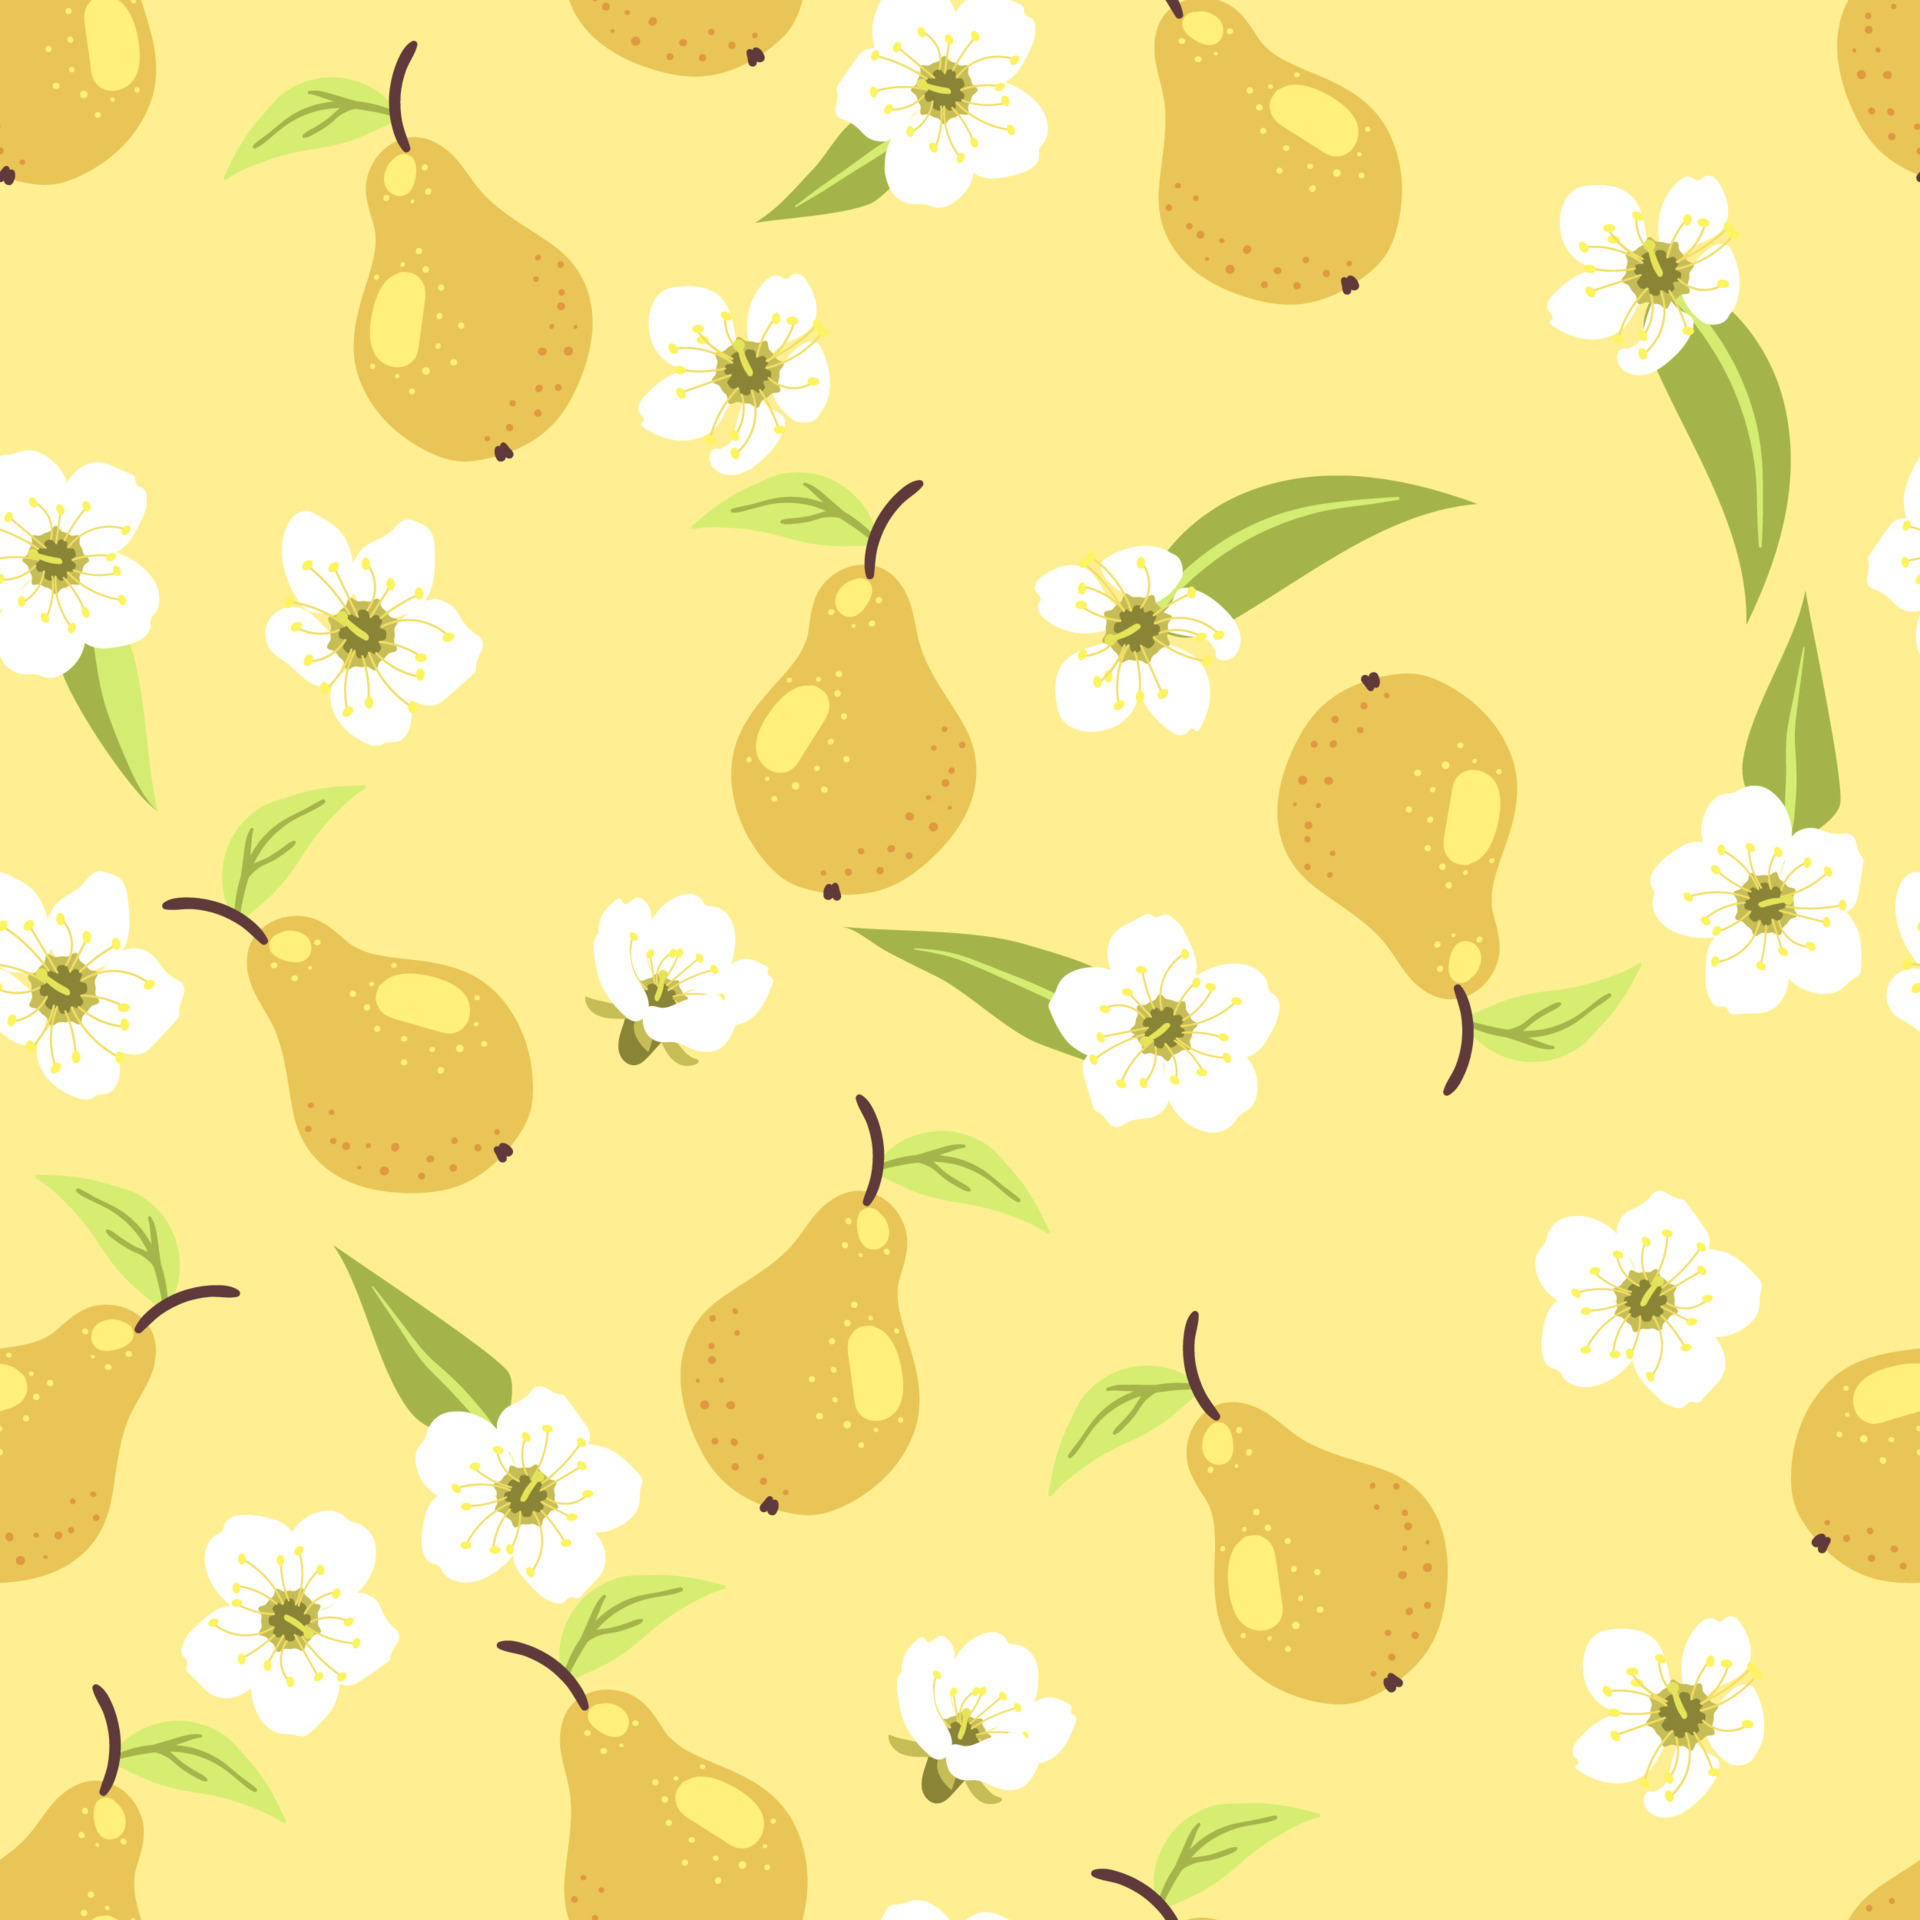 1920x1920 Seamless cute summer autumn pear pattern with fruits, leaves, white flowers on yellow pastel background. Vector illustration cover, wallpaper texture, wrapping backdrop, vintage packaging. 7726142 Vector Art